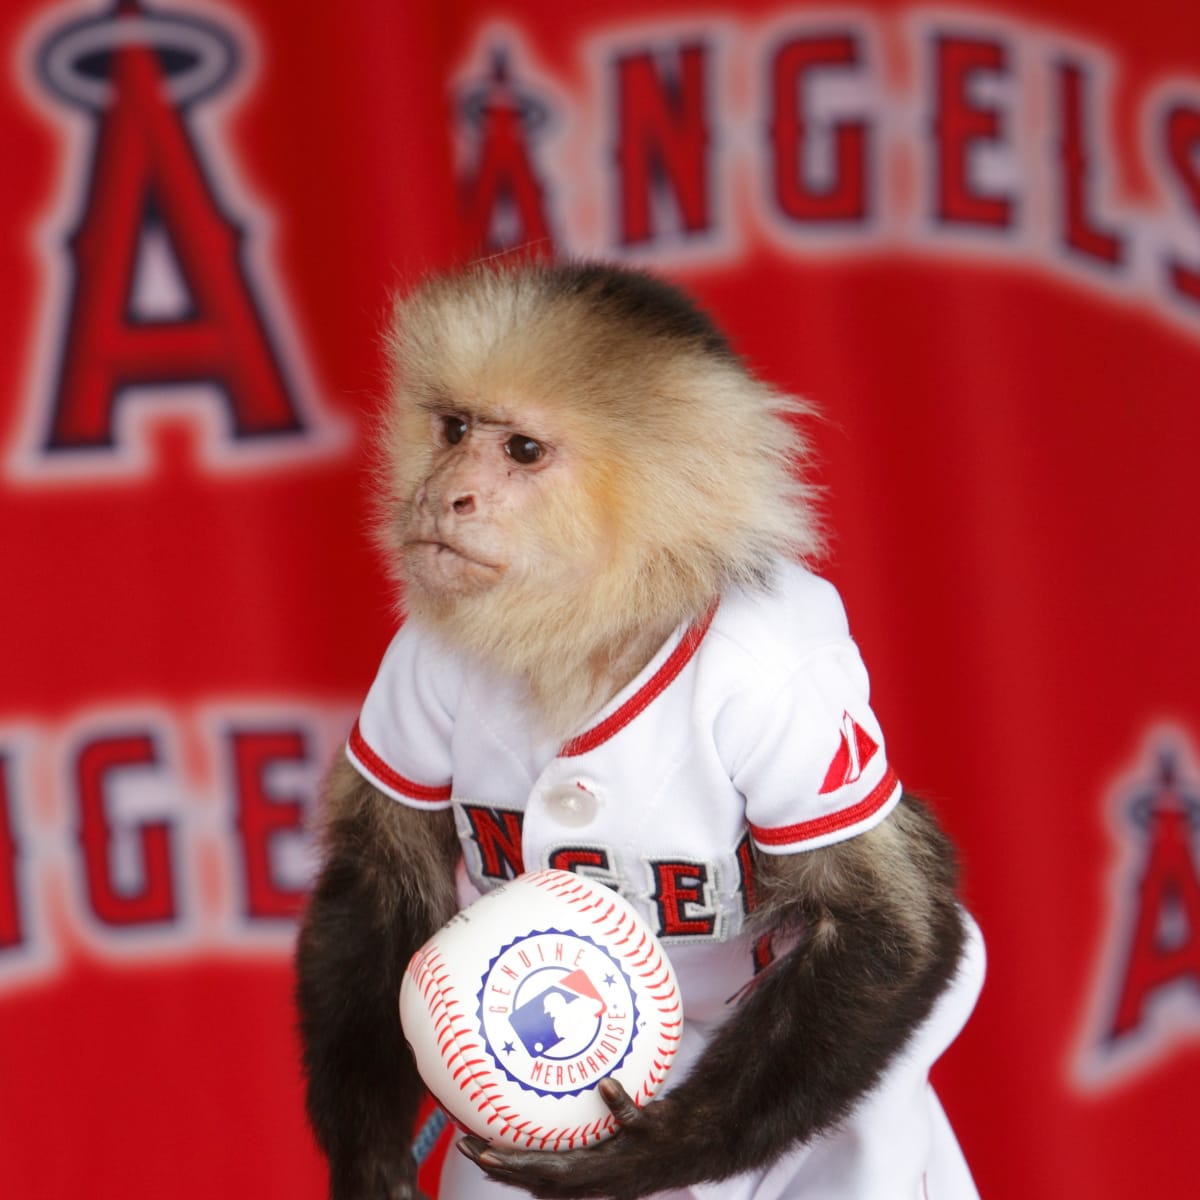 The Angels Rally Monkey did a 10/10 job on this puck drop